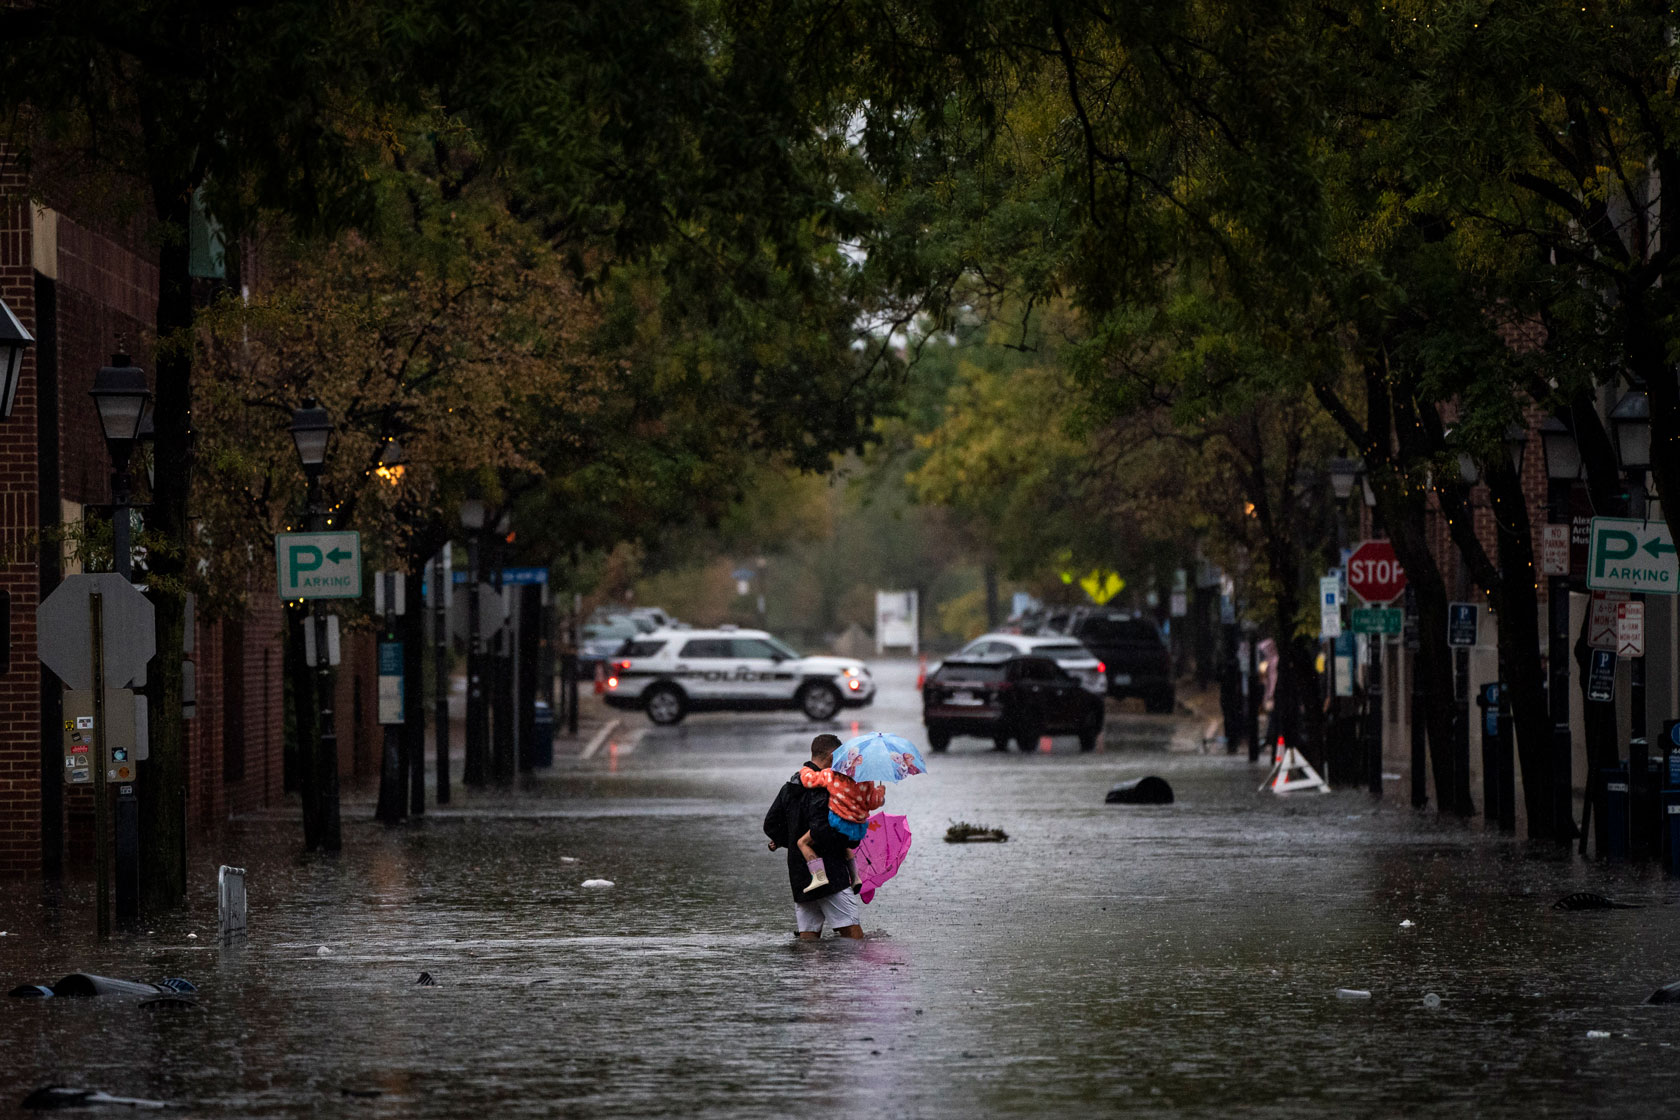 A man holding children walks in the middle of a flooded street.